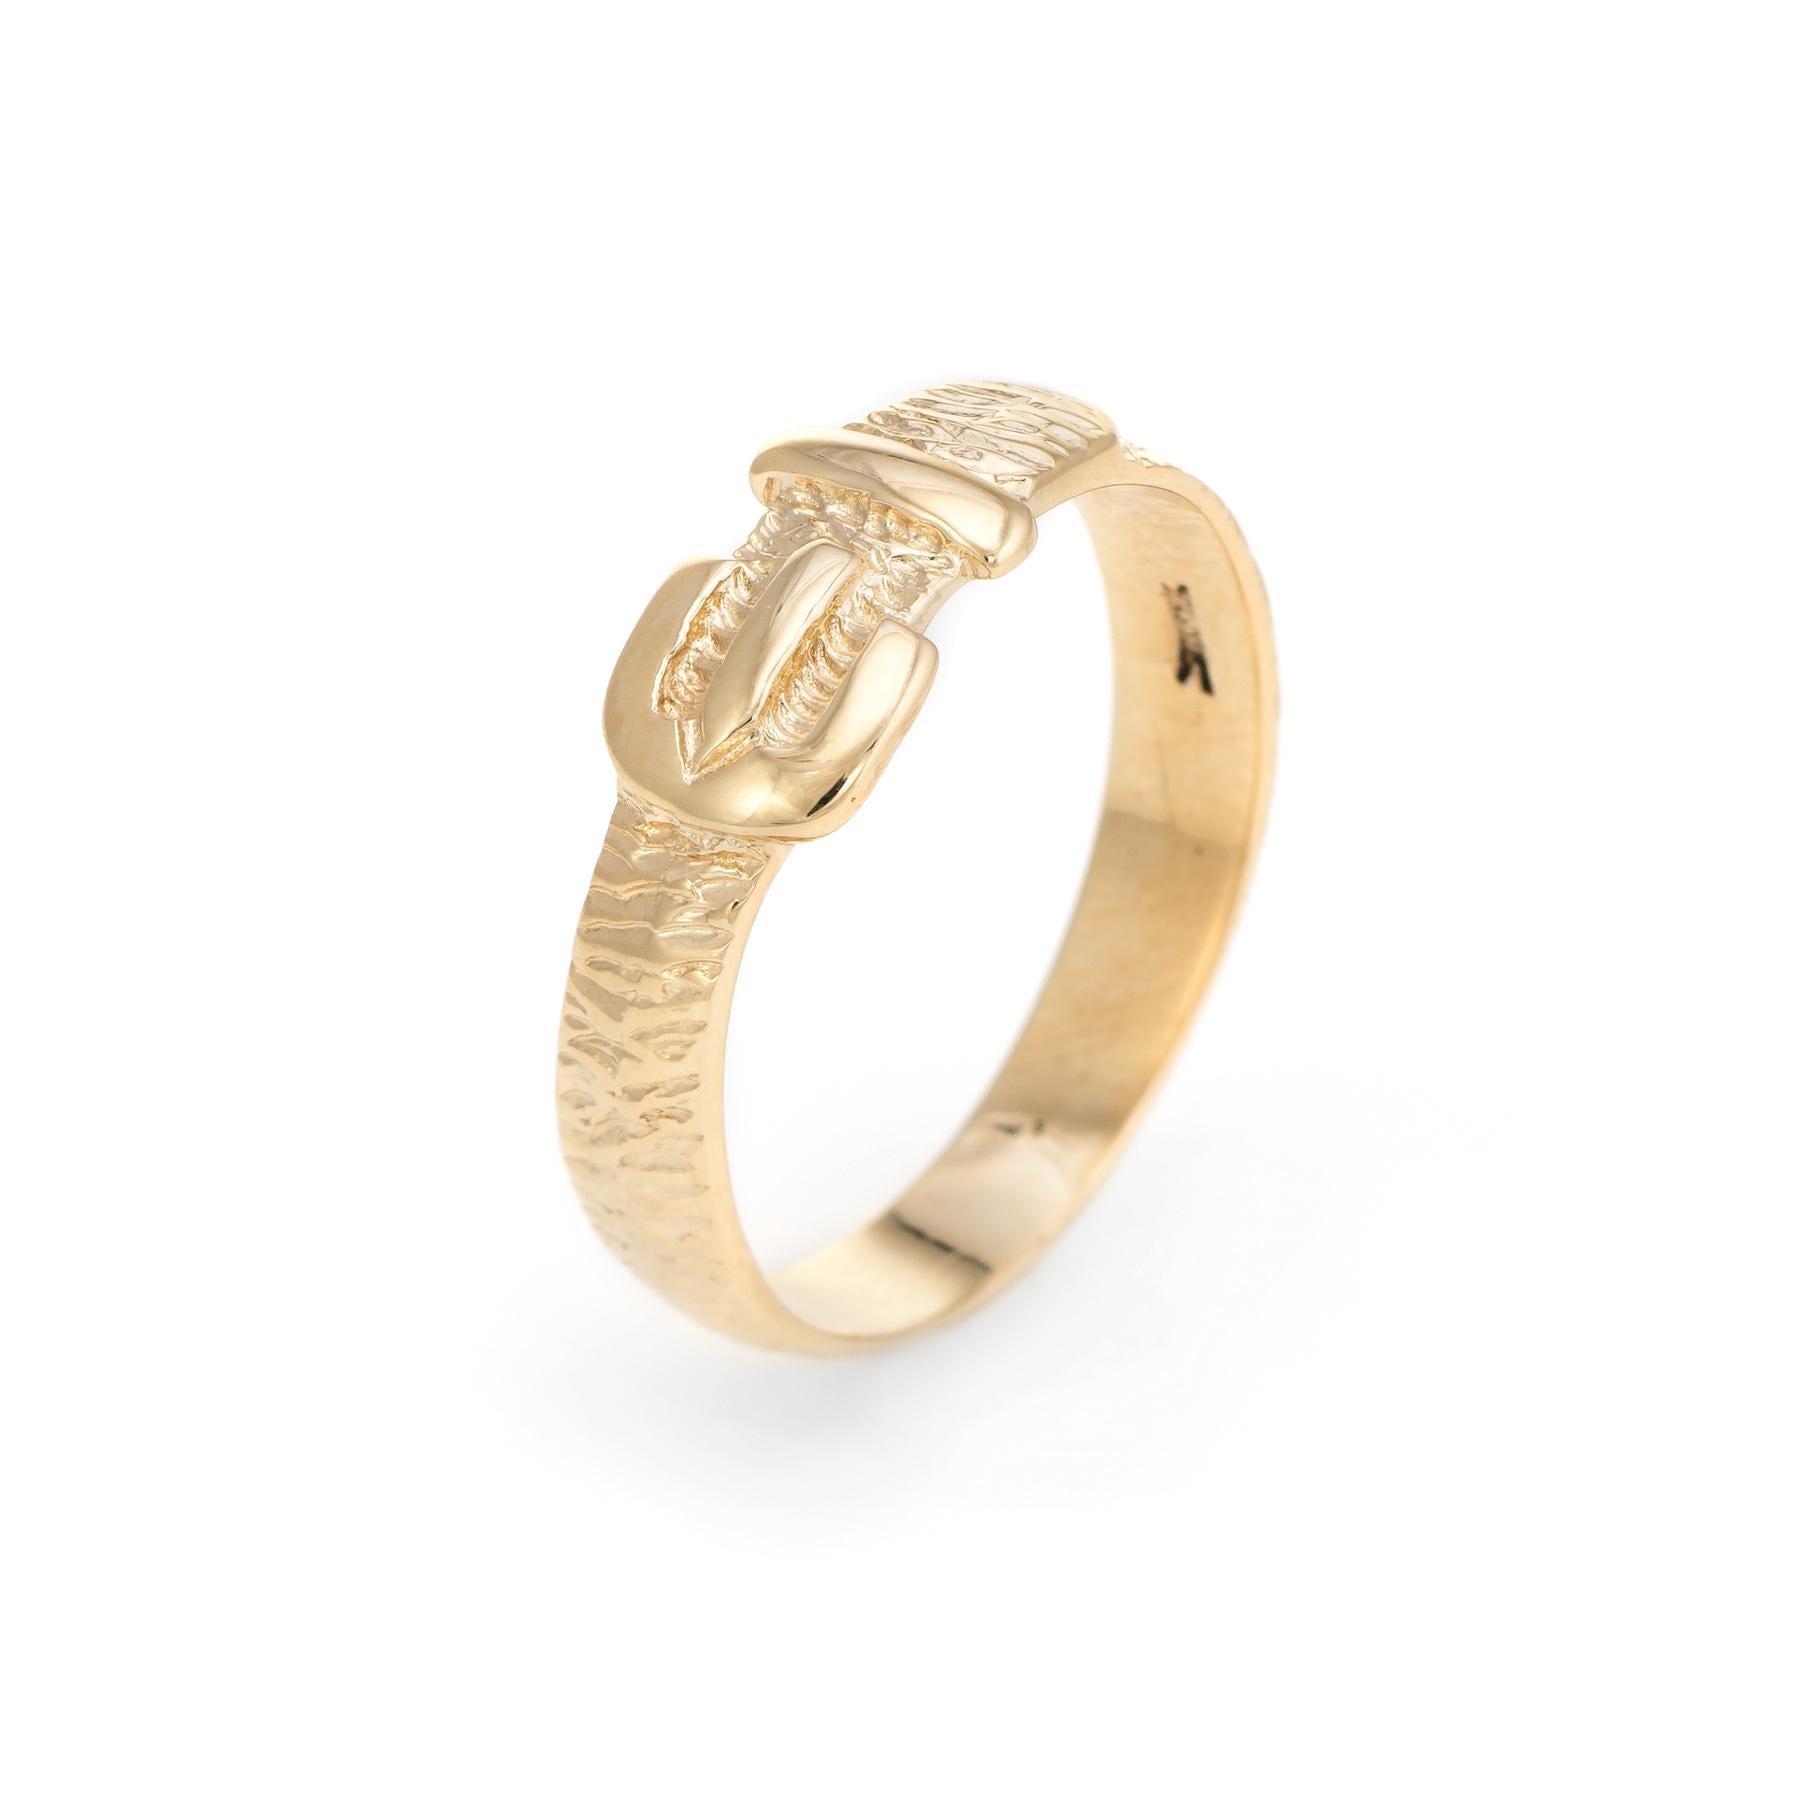 Finely detailed vintage buckle band, crafted in 9 karat yellow gold. 

The buckle design has long been popular as a promise ring or love token. The clasped belt wraps around the finger, representing your devotion to the one you love. The ring would